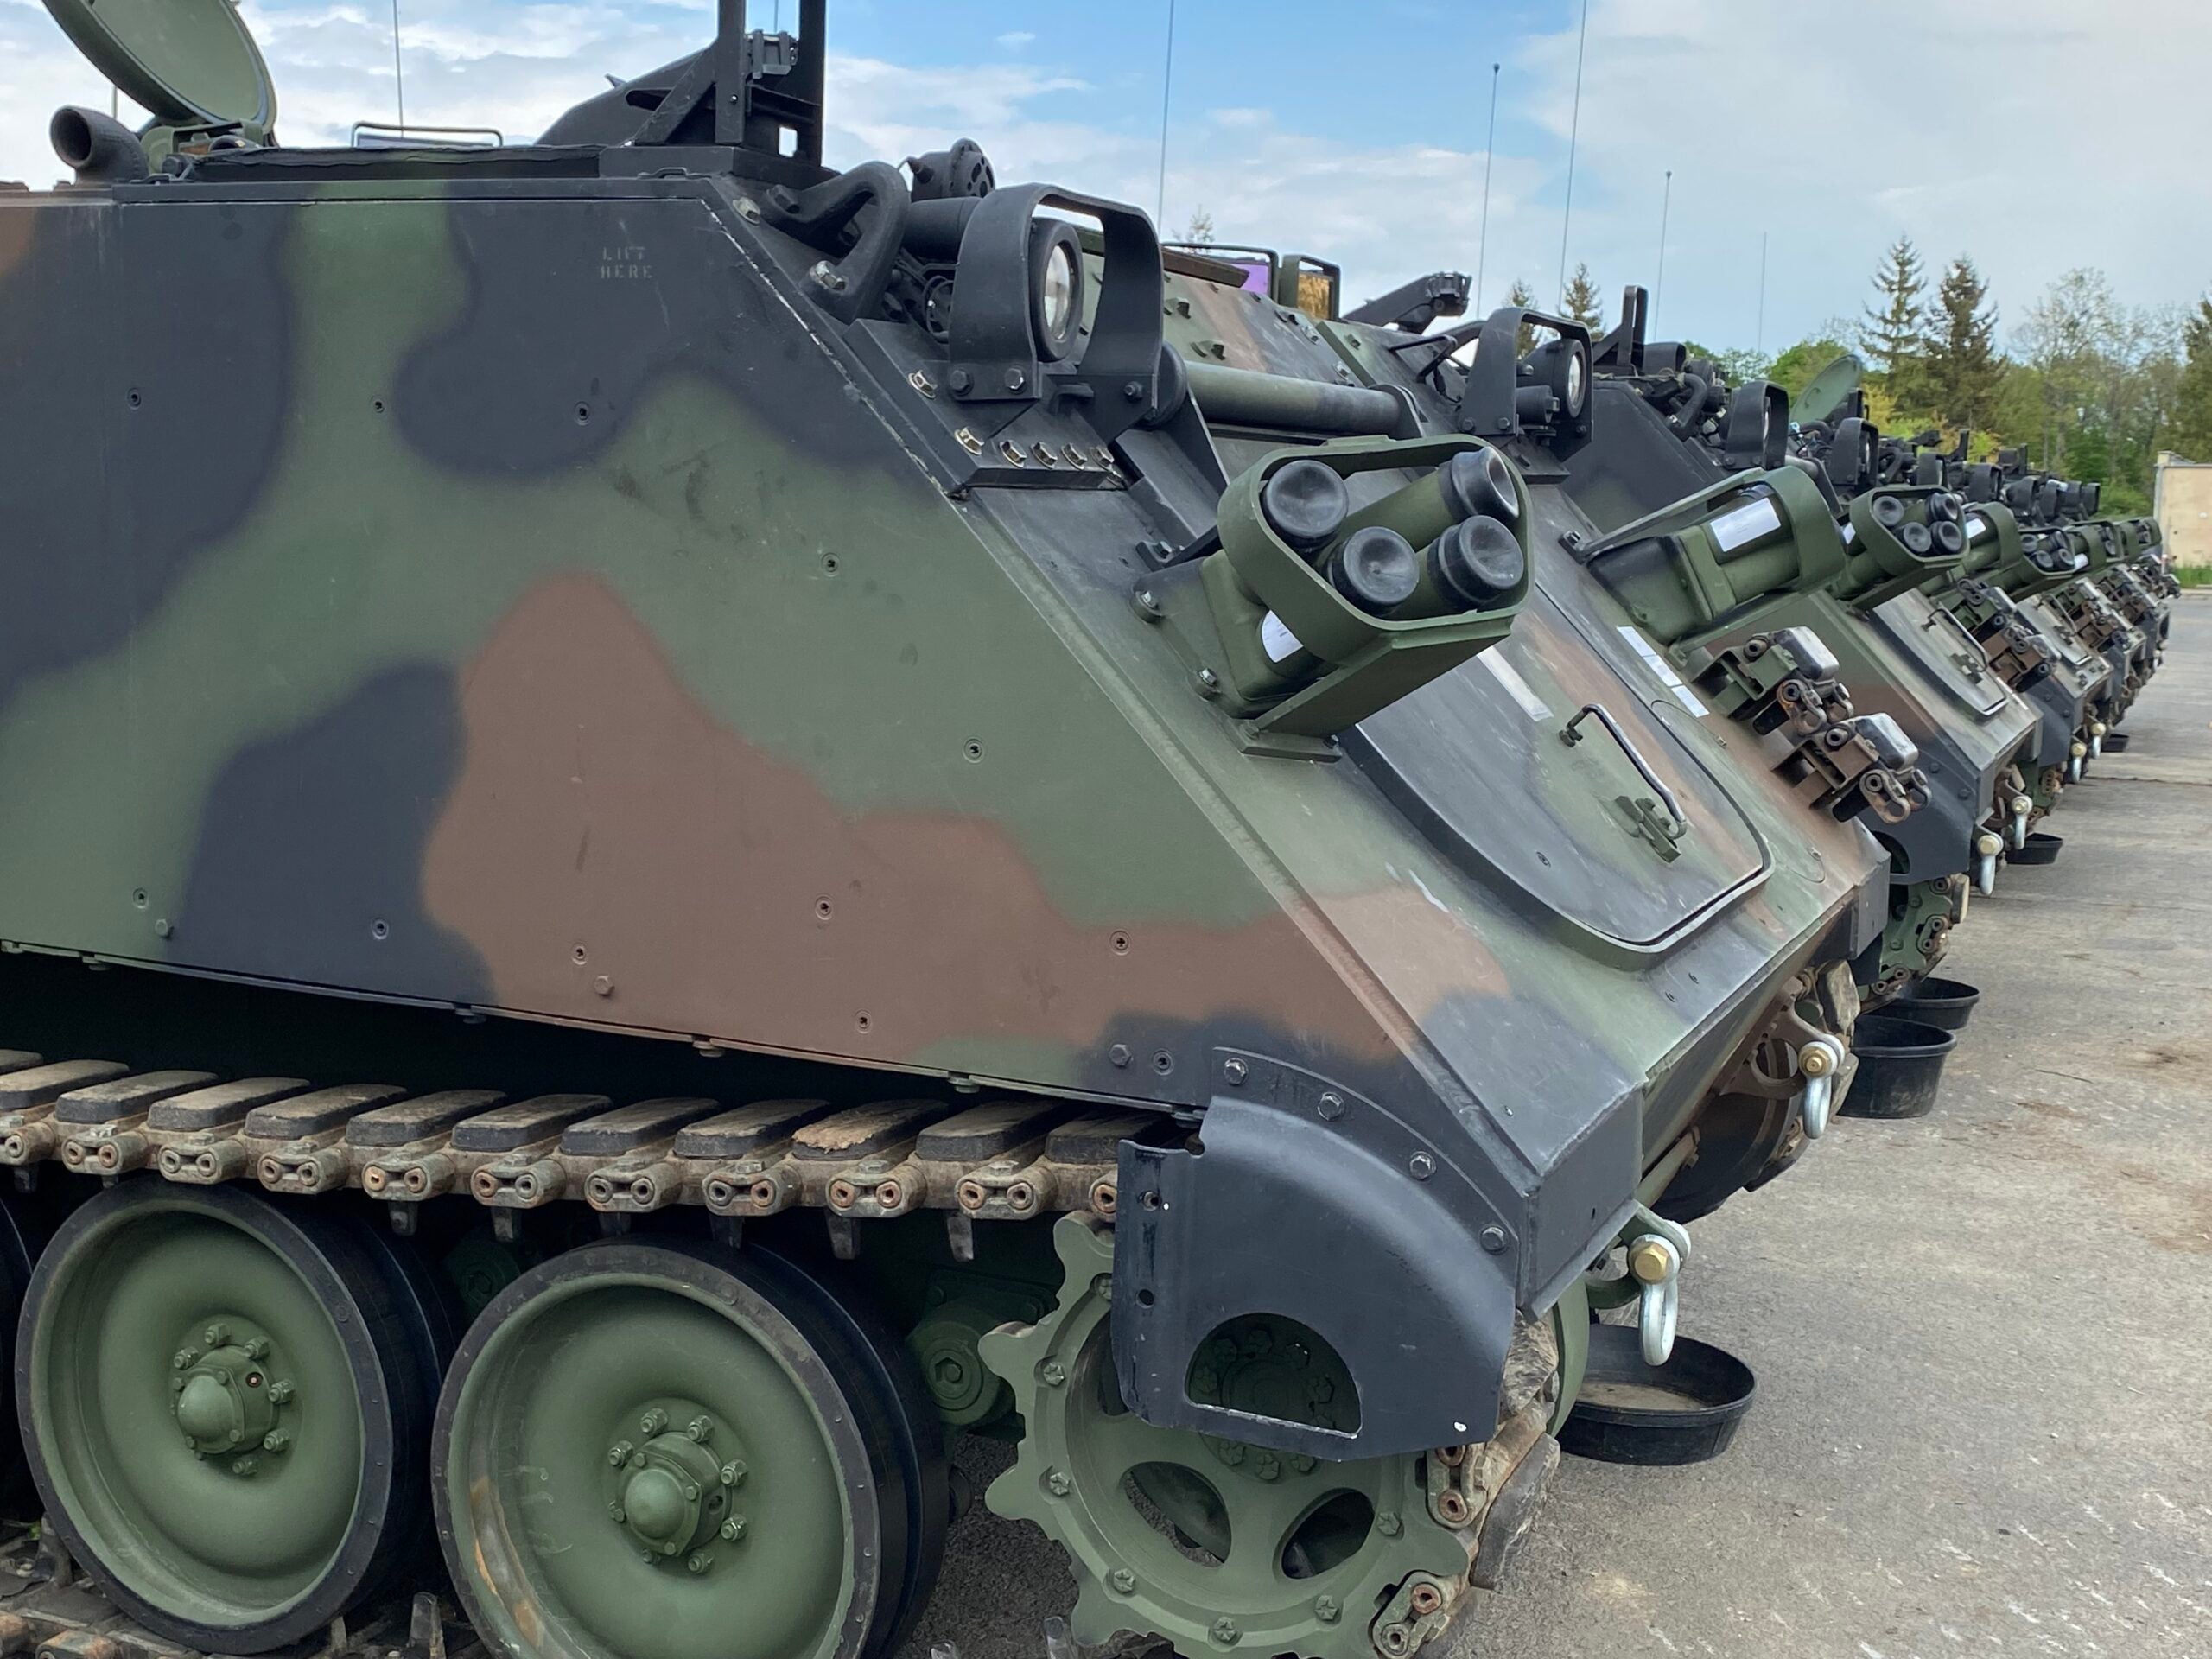 A line of M113 armored personnel carriers stand at the ready at the Equipment Configuration and Hand-off Area in Lešt’, Slovakia, May 9. The APCs, which came from the 405th Army Field Support Brigade’s Army Prepositioned Stocks-2 worksite in Eygelshoven, Netherlands, were issued to the 62nd Engineer Company deployed to Slovakia from Fort Carson, Colorado, for DEFENDER-Europe 22.